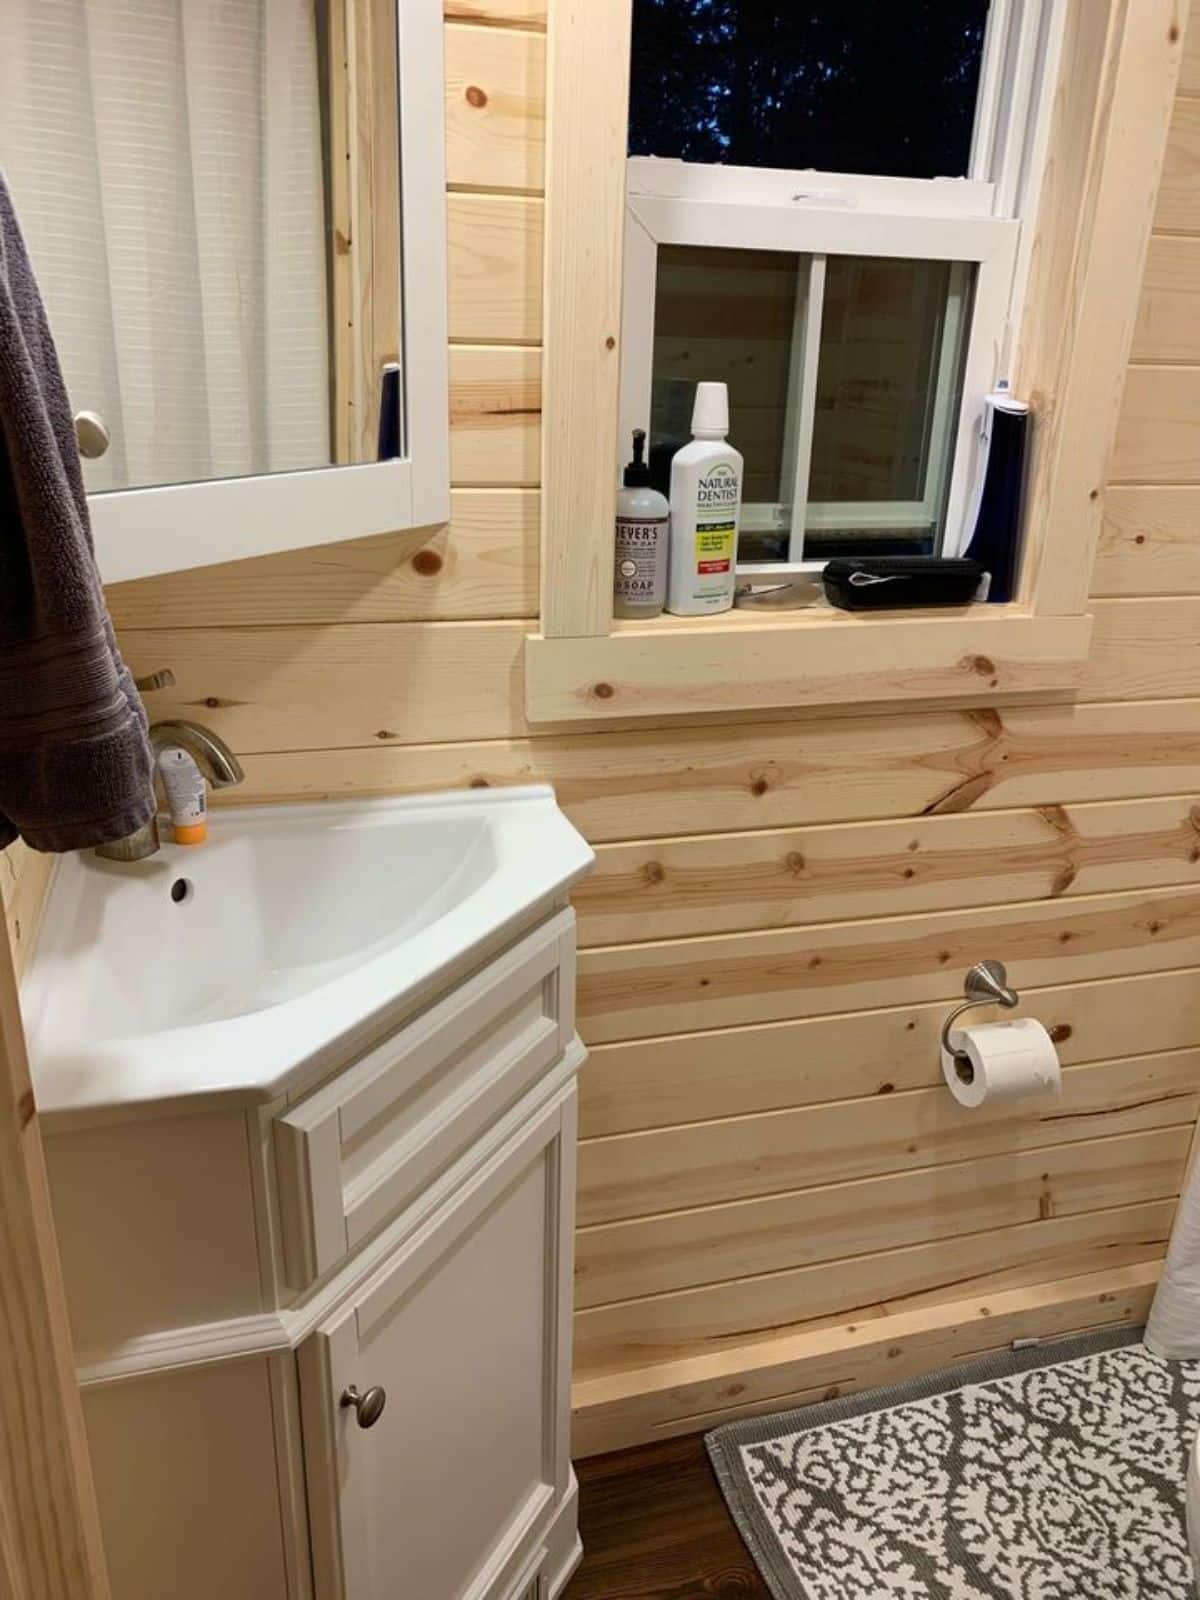 sink with vanity installed in bathroom of 25' RVIA certified tiny home